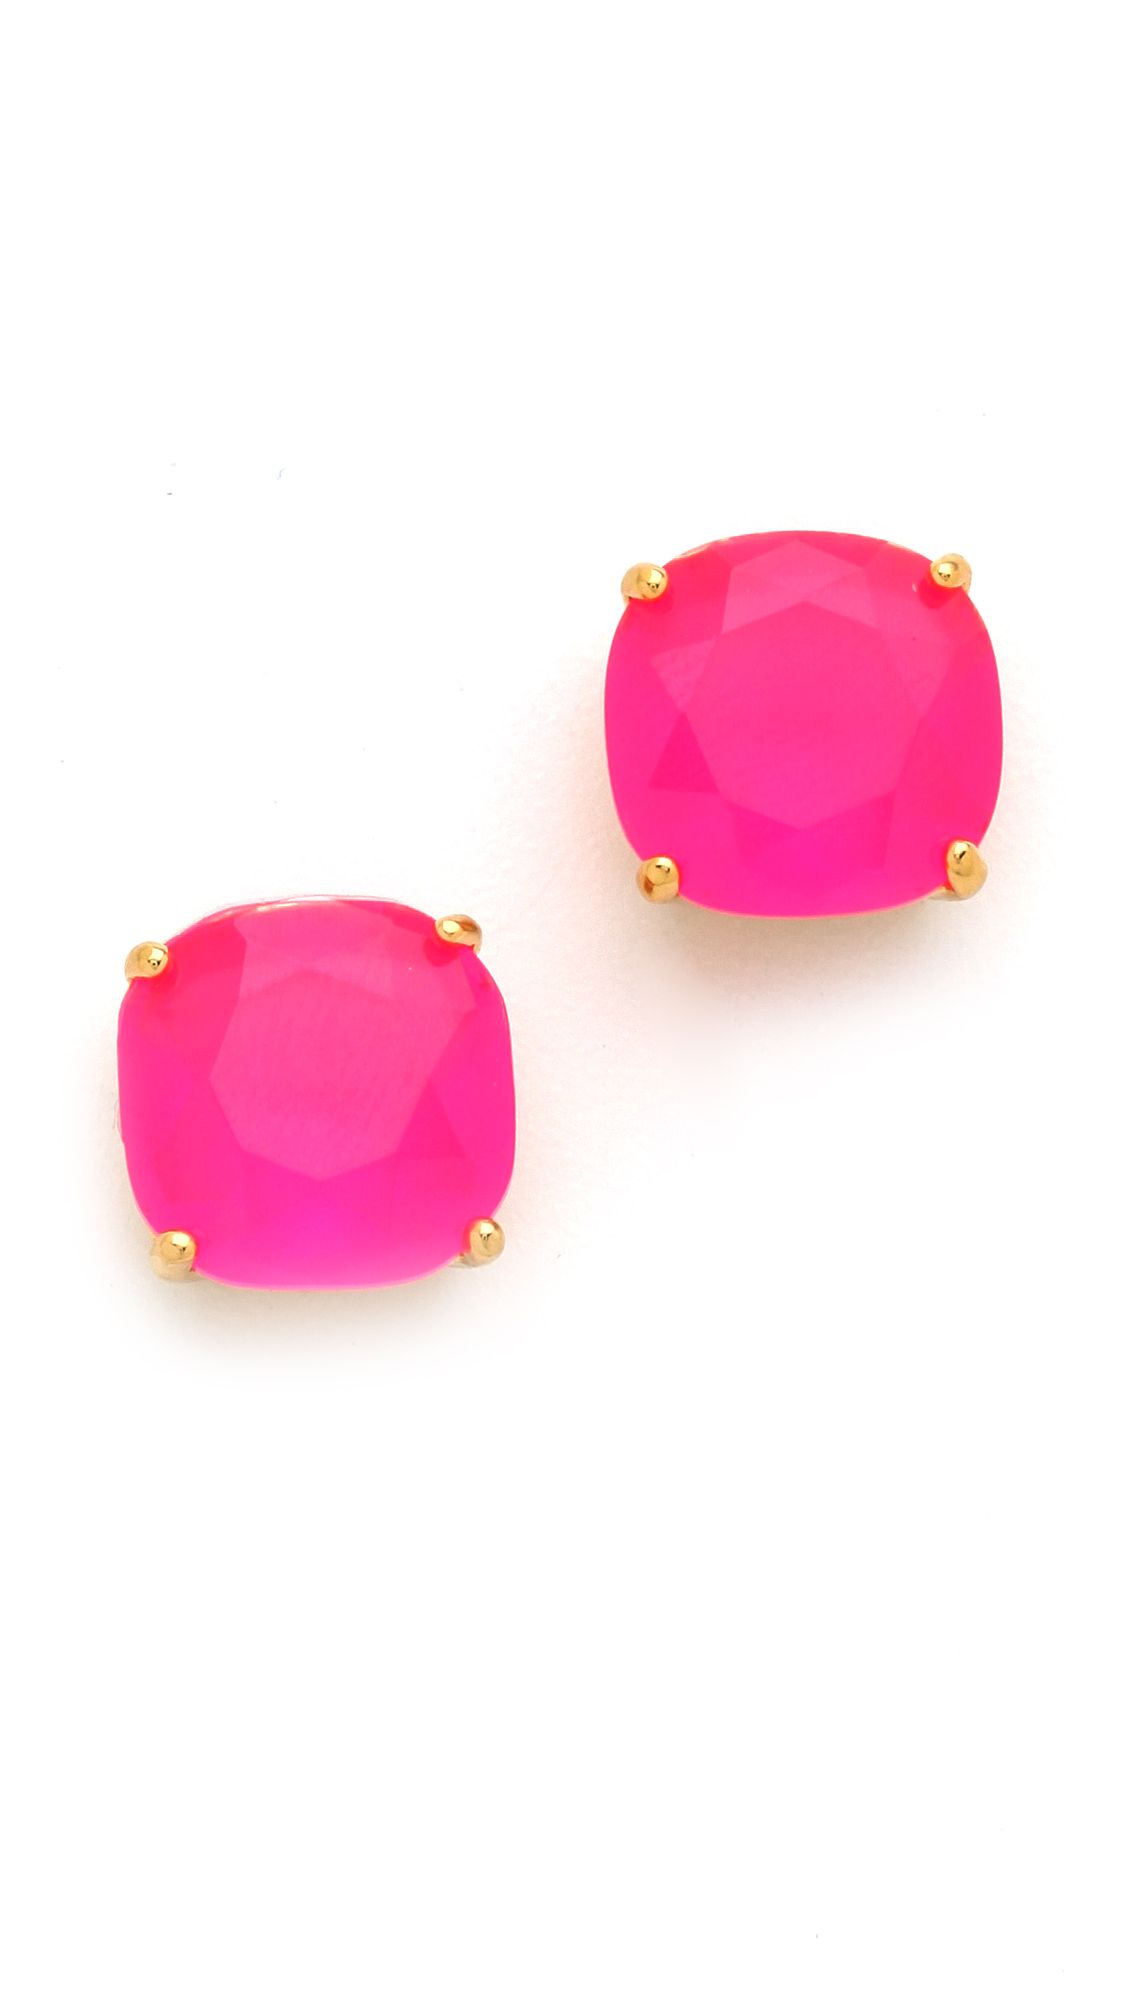 Kate Spade New York Small Square Stud Earrings - Flo Pink | Shopbop